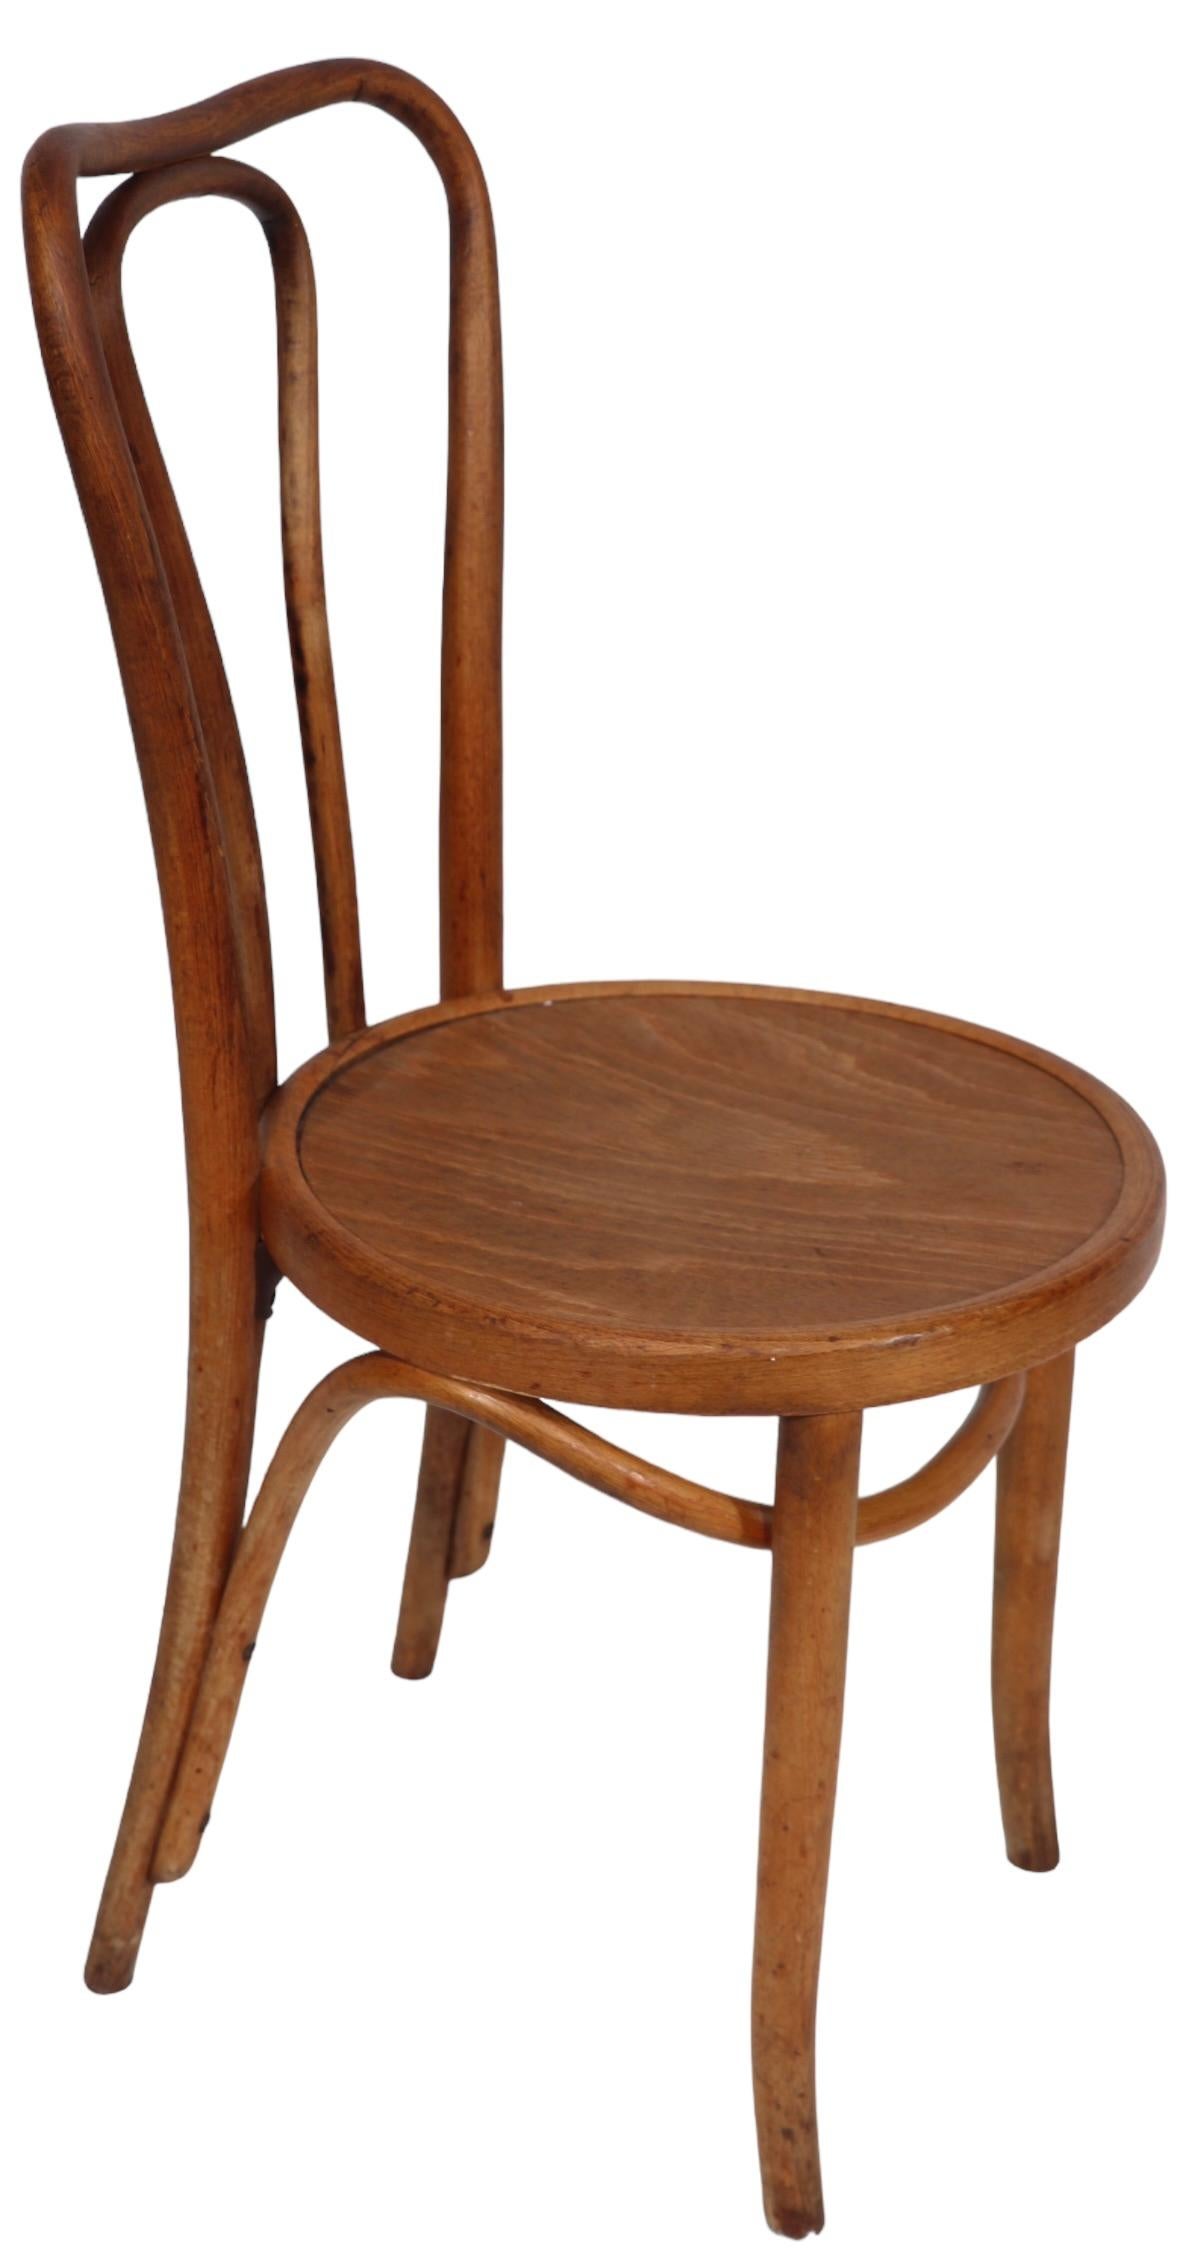 Vienna Secessionist Bentwood Chairs att. to Thonet  Made in Poland 3 available  5